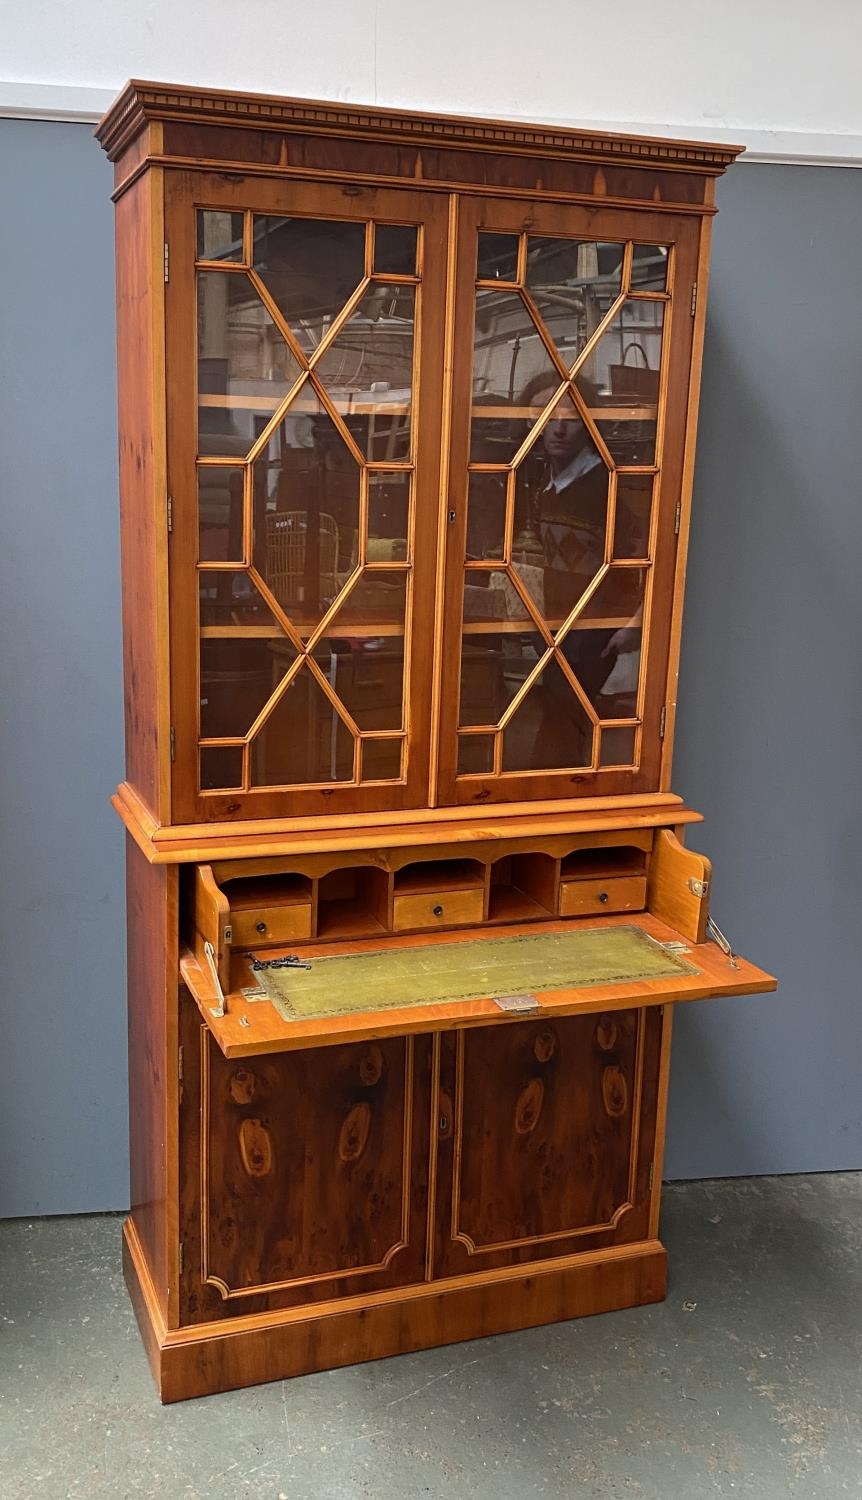 A 20th century yew veneer glazed bookcase, with single drawer and cupboards below, 95x39x200cmH - Image 2 of 2